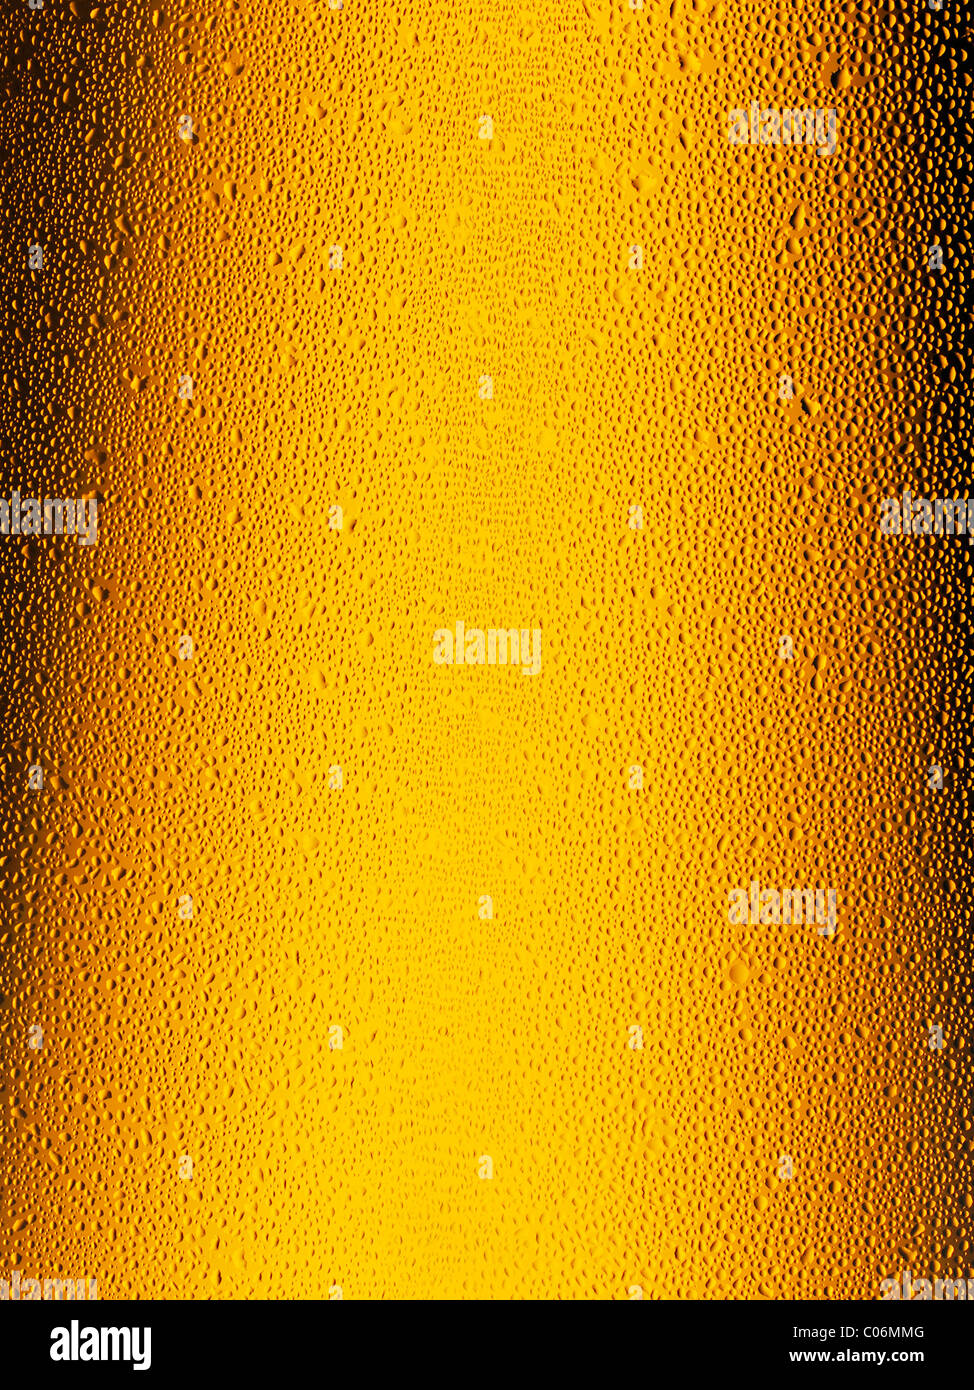 Beer Bottle, Close Up. Showing Condensation on the Bottle Neck. Stock Photo